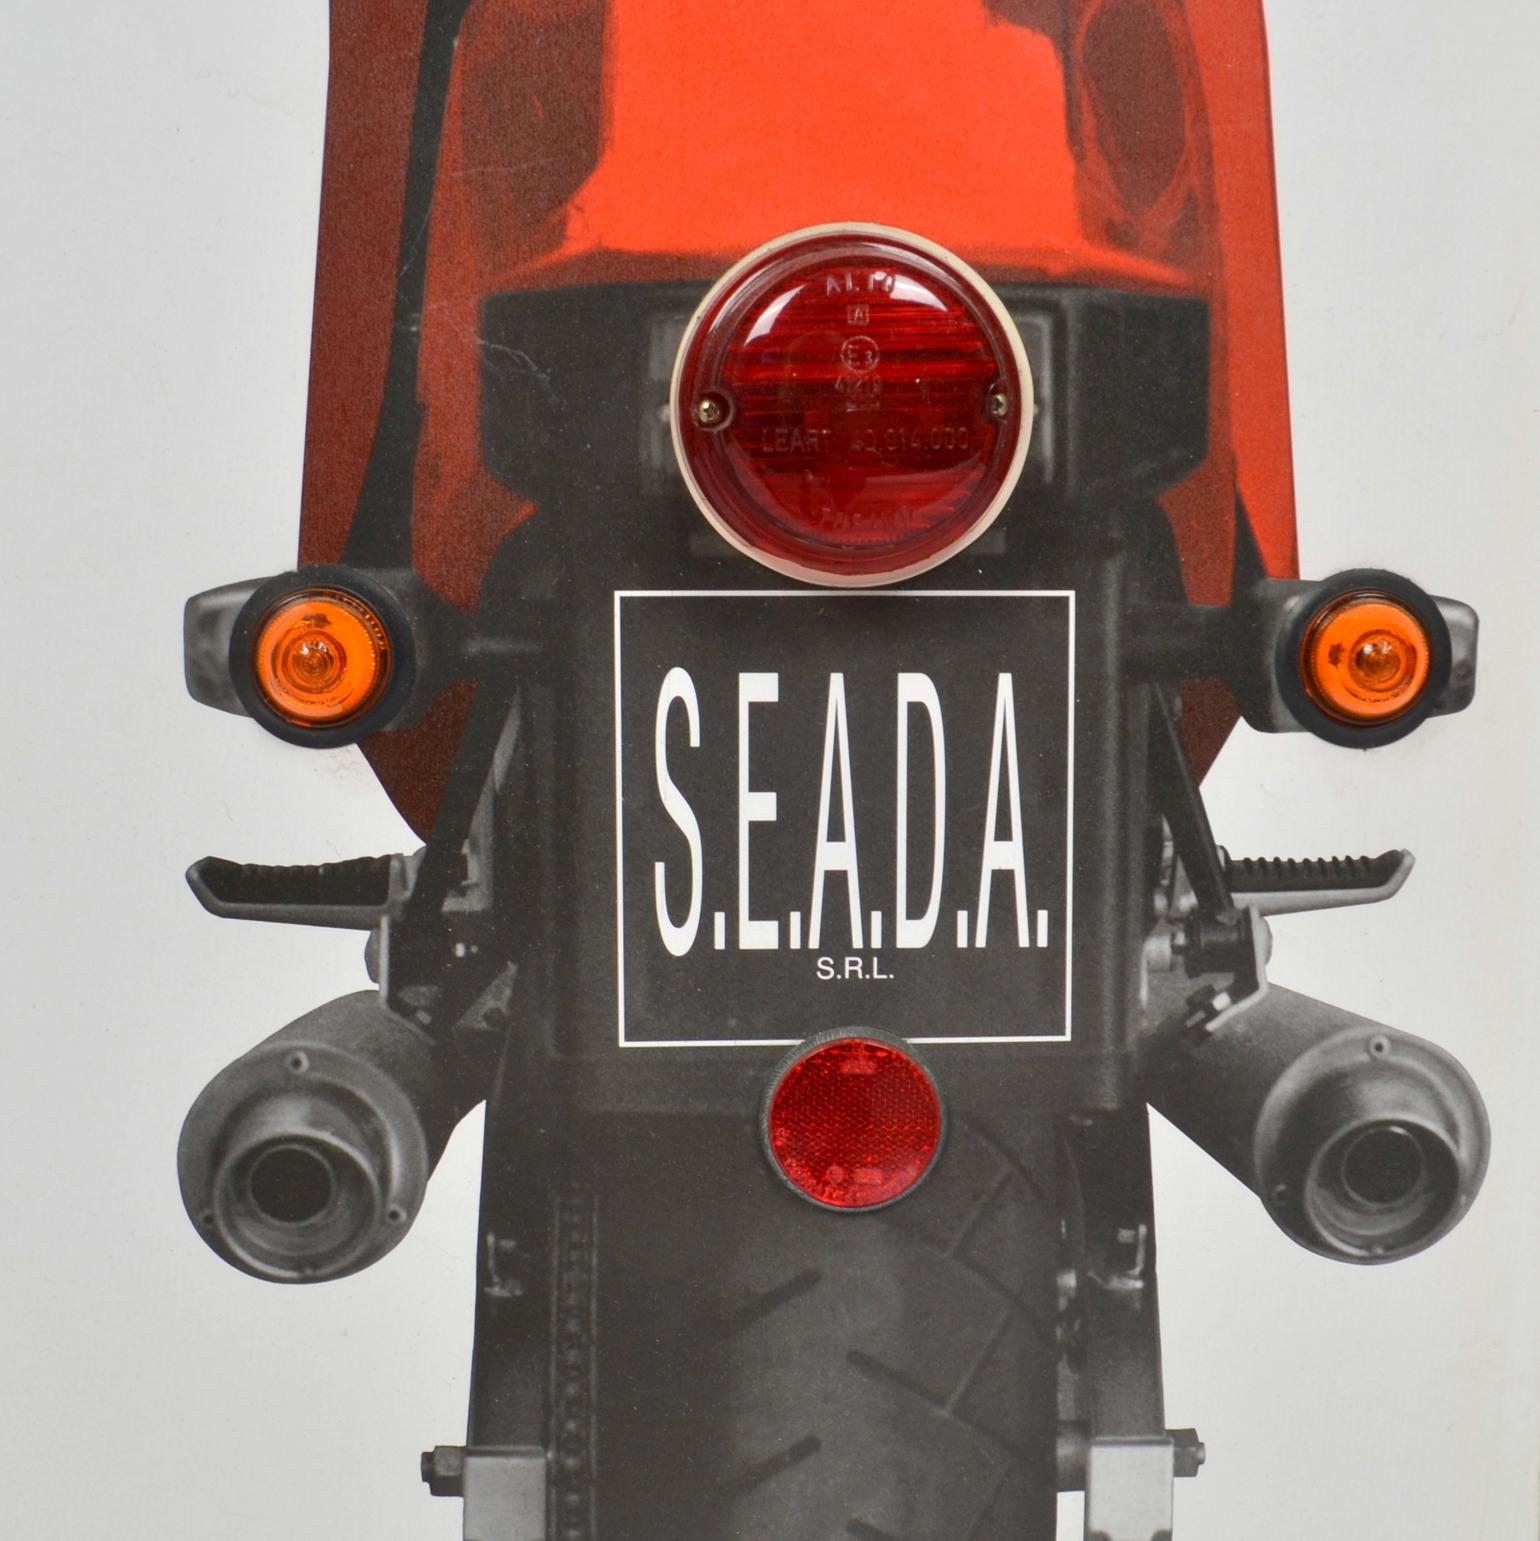 German Wall Mounted Artwork with Motorbike Demonstrating Lights for Driving Instruction For Sale